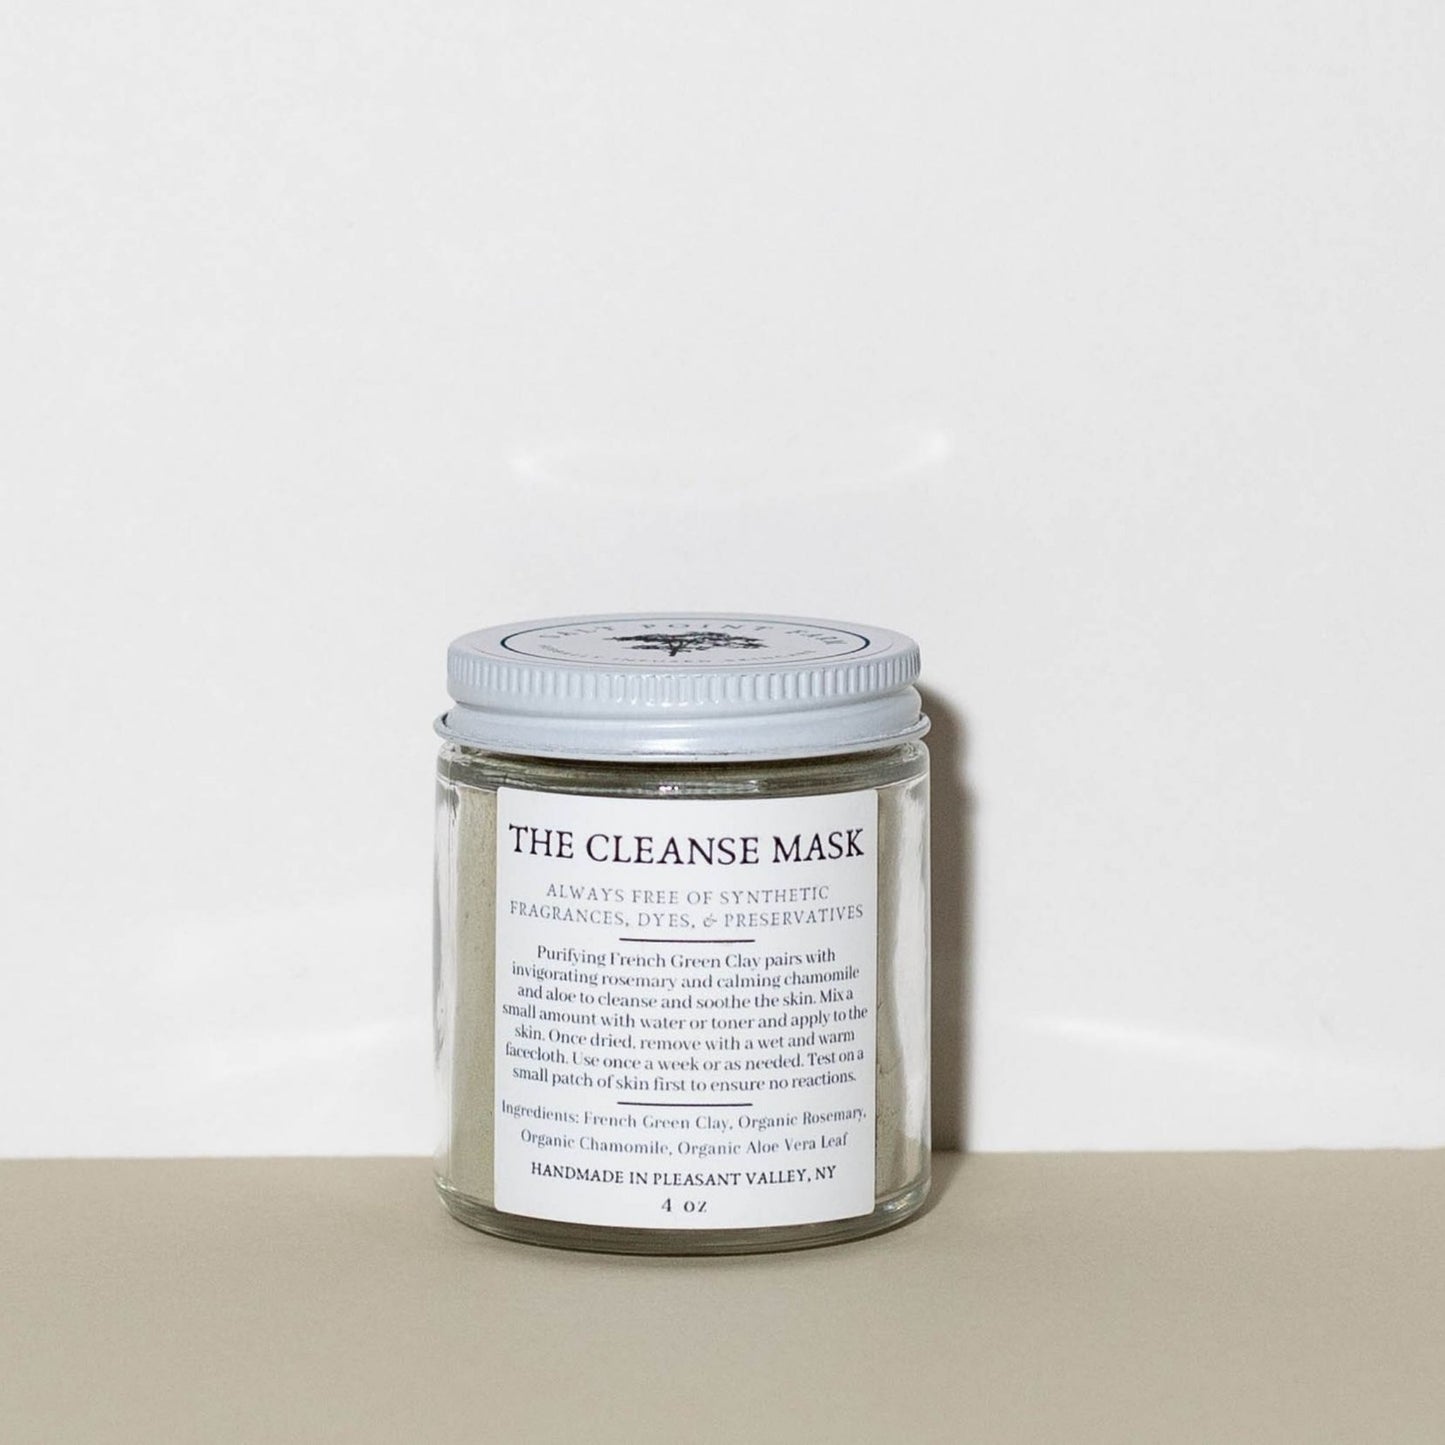 The Cleanse Mask